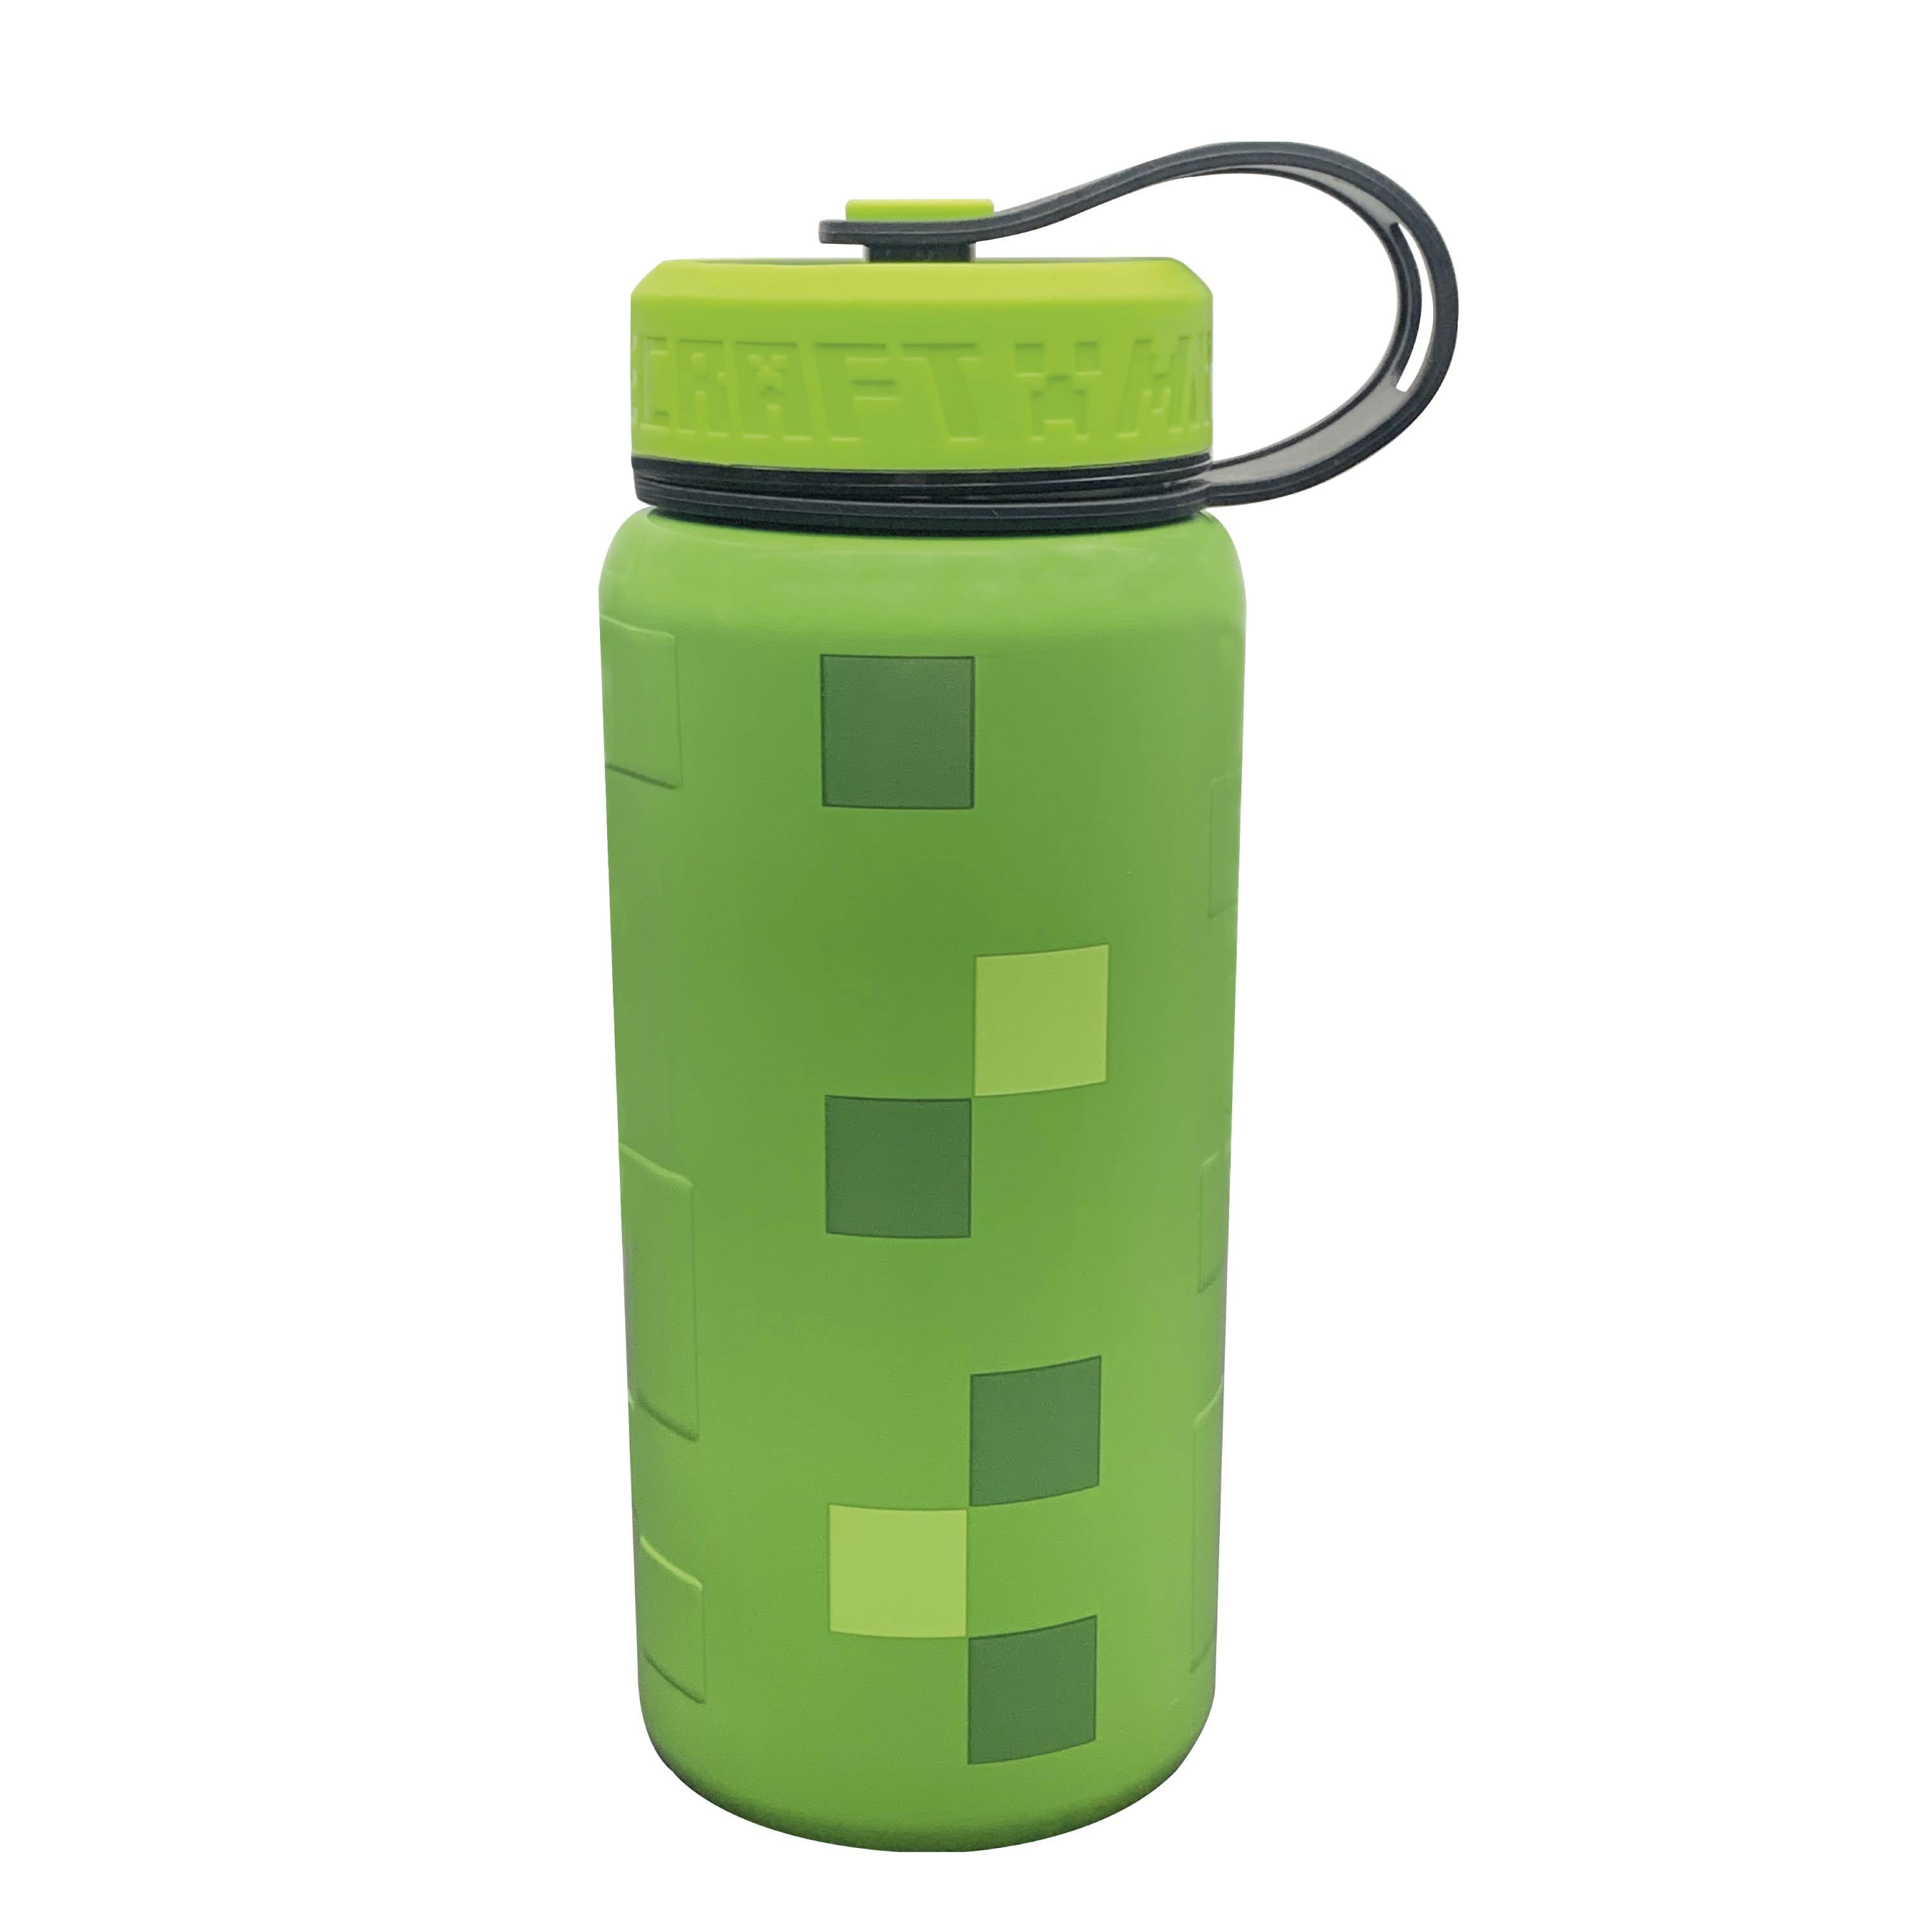 Minecraft Thermal Insulated Water Bottle Vacuum Flask School New BPA FREE 